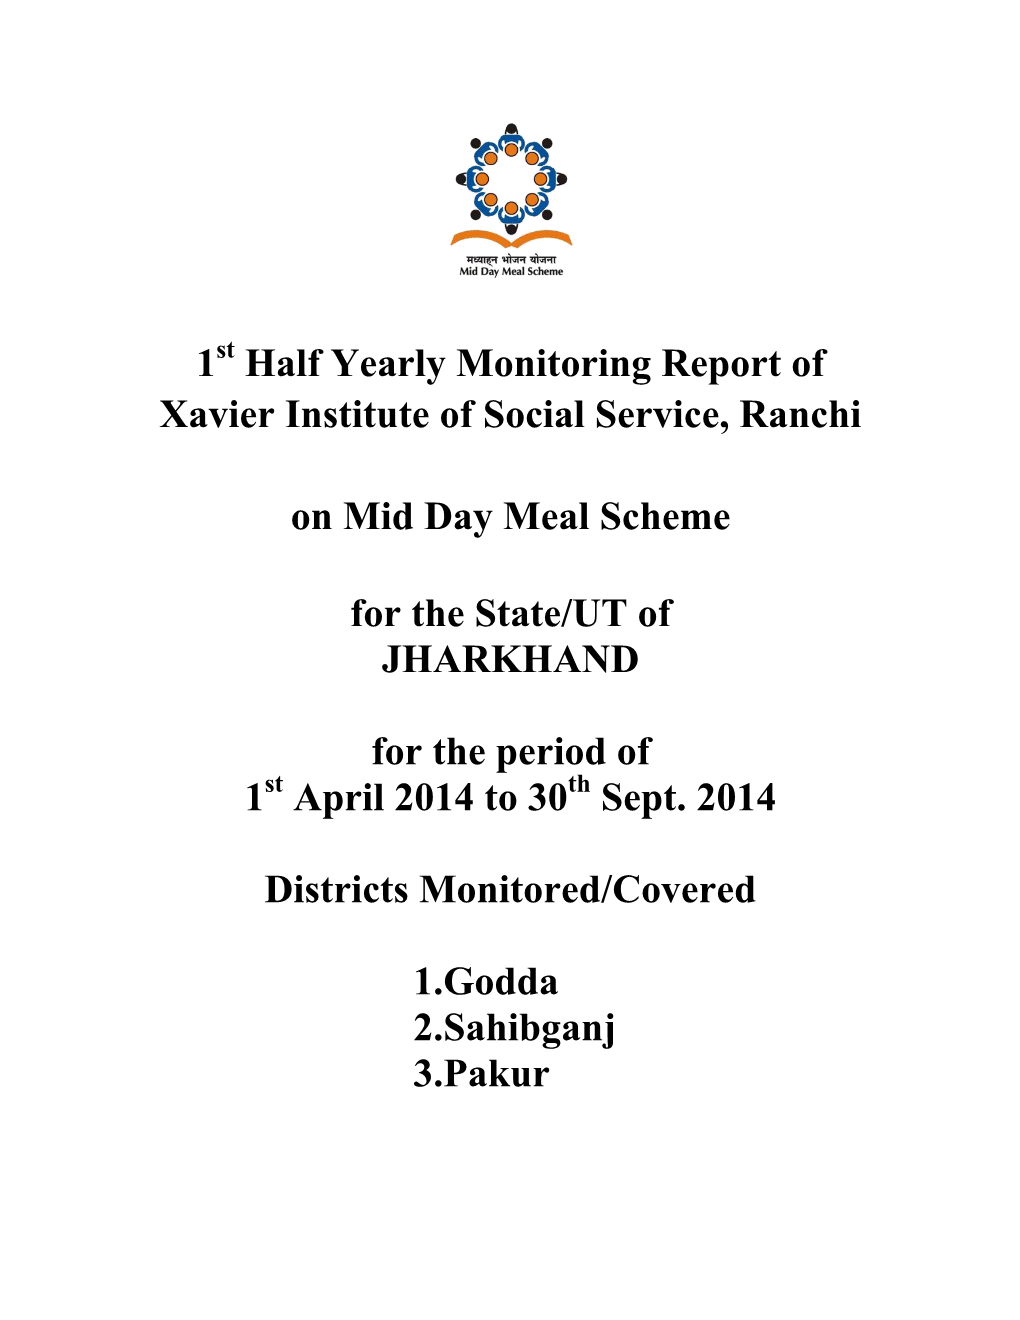 1 Half Yearly Monitoring Report of Xavier Institute of Social Service